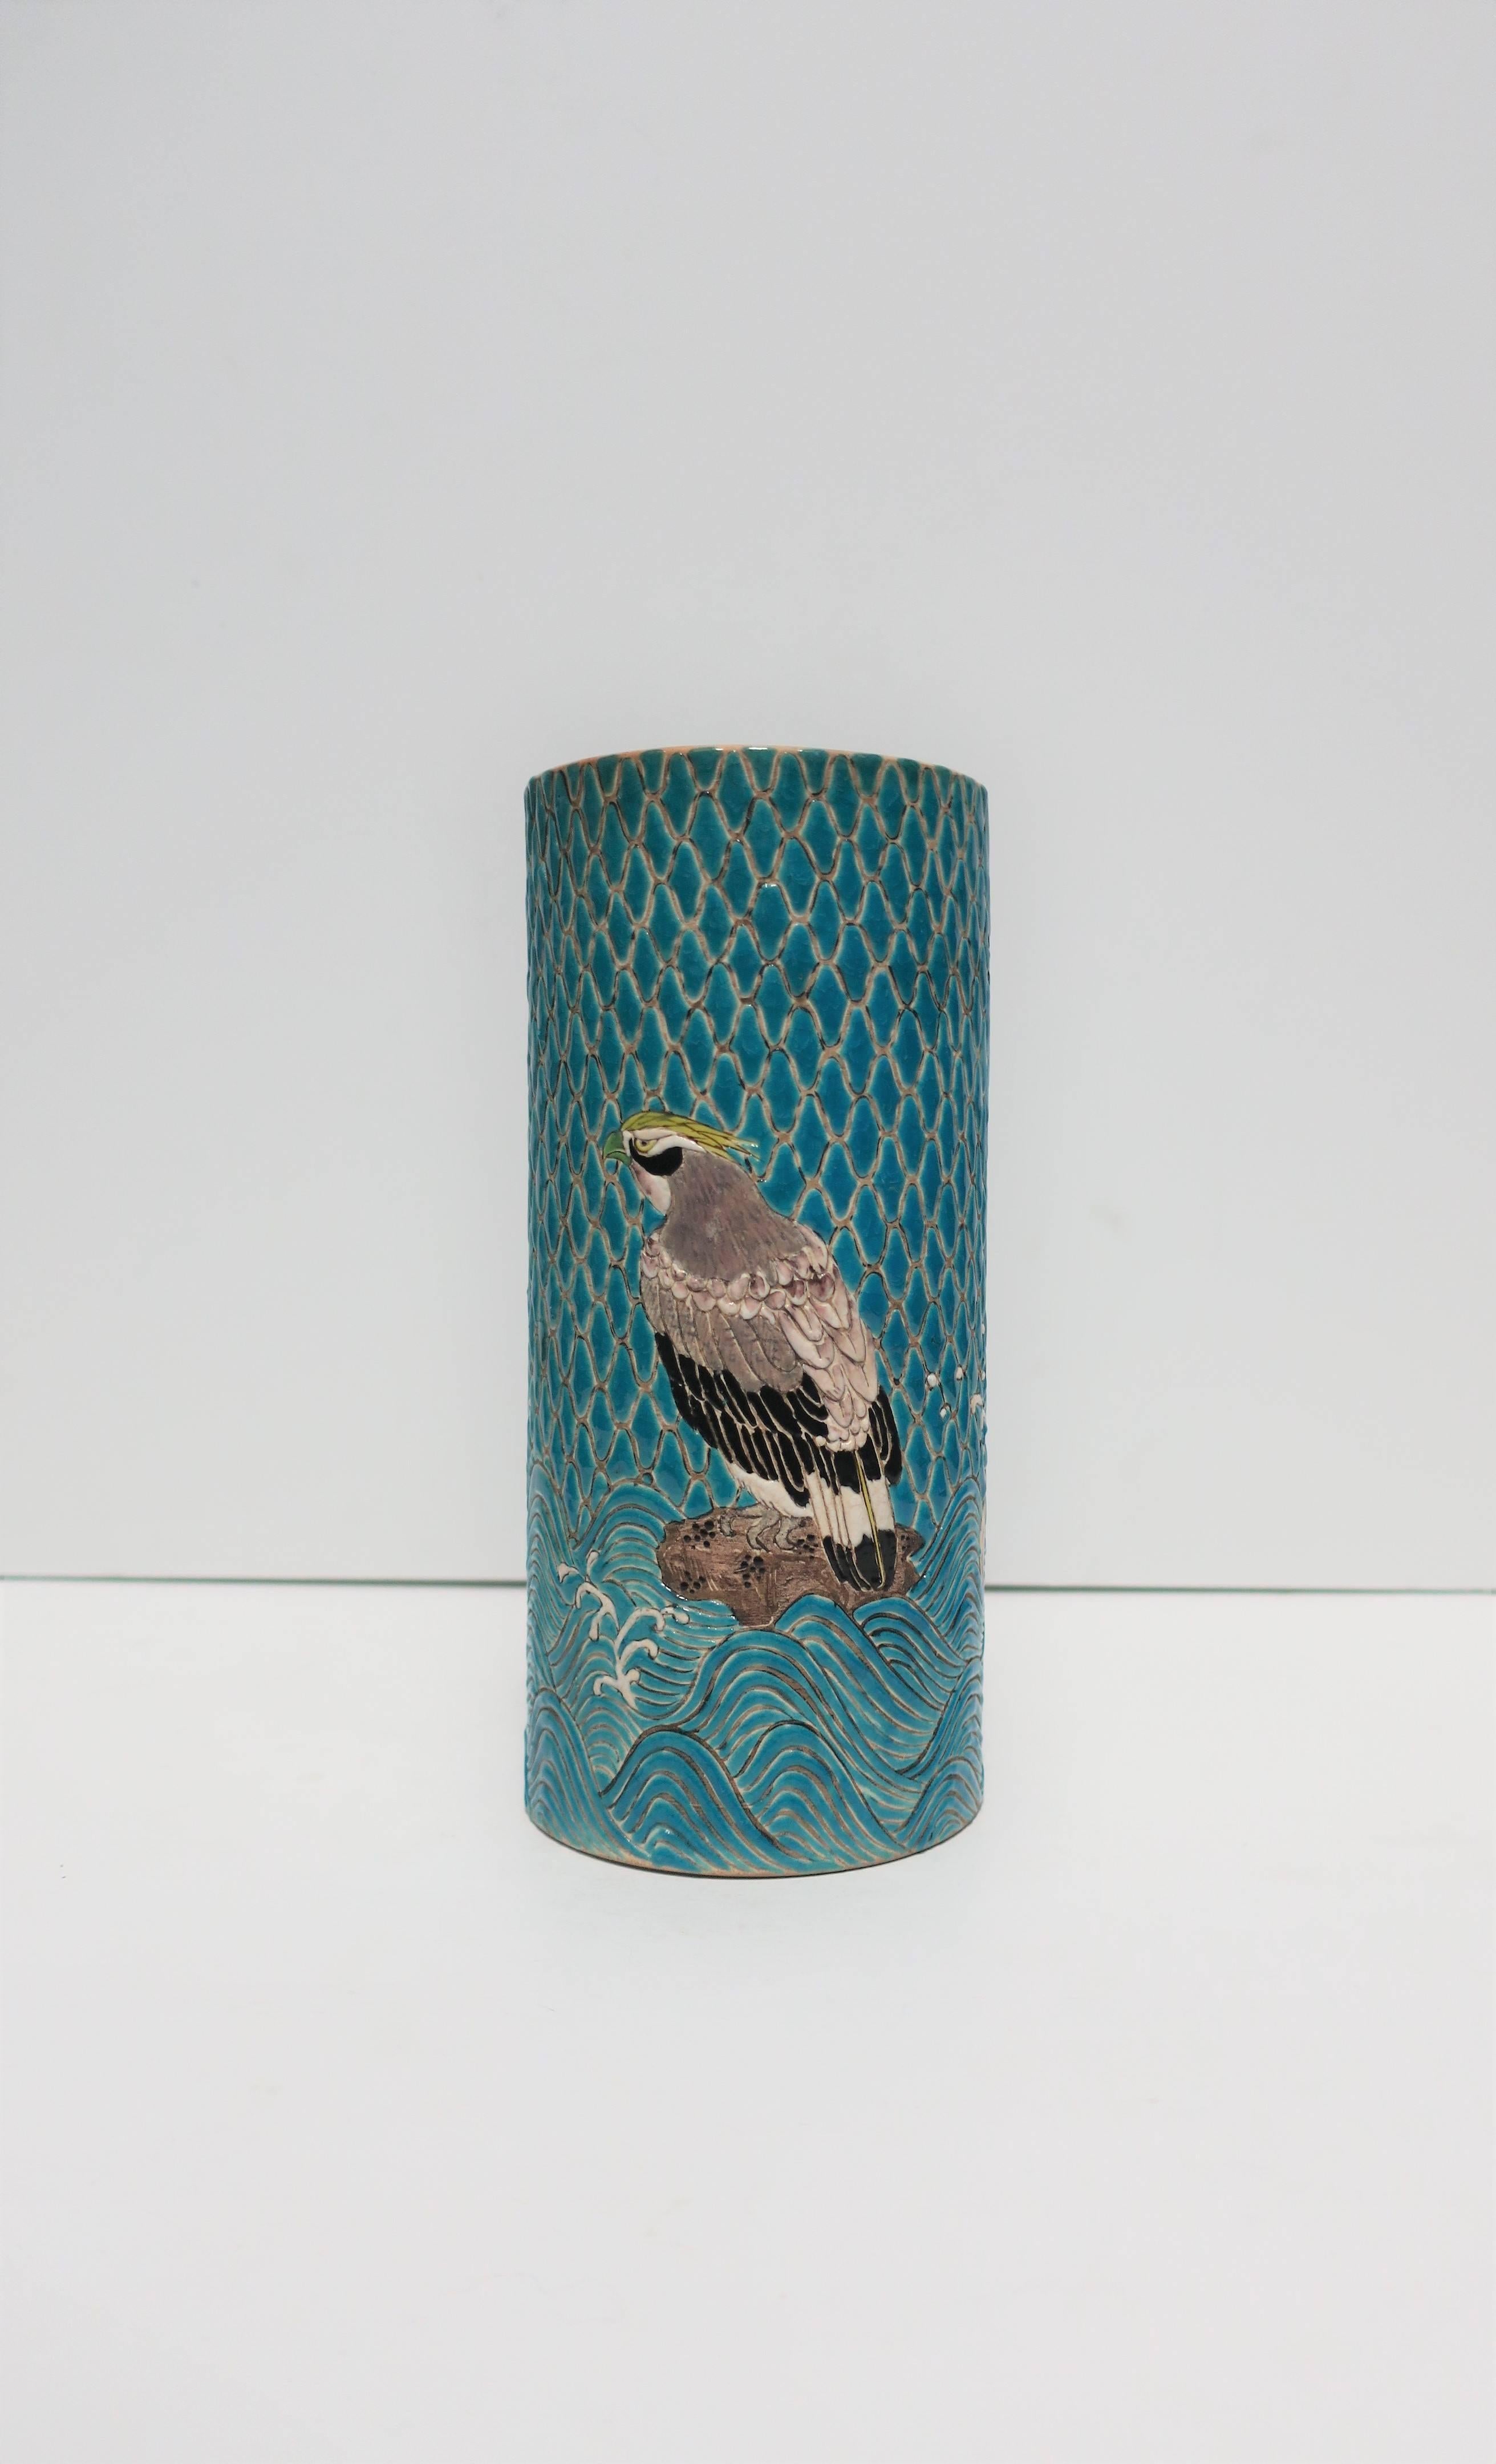 A beautiful Japanese Satsuma Majolica style earthenware vase, circa early-20th century, Meiji period, Japan. Vase is decorated with a beautiful tile-like exterior; a raised relief of crane birds, blue water and sky. Marker's mark on bottom as show